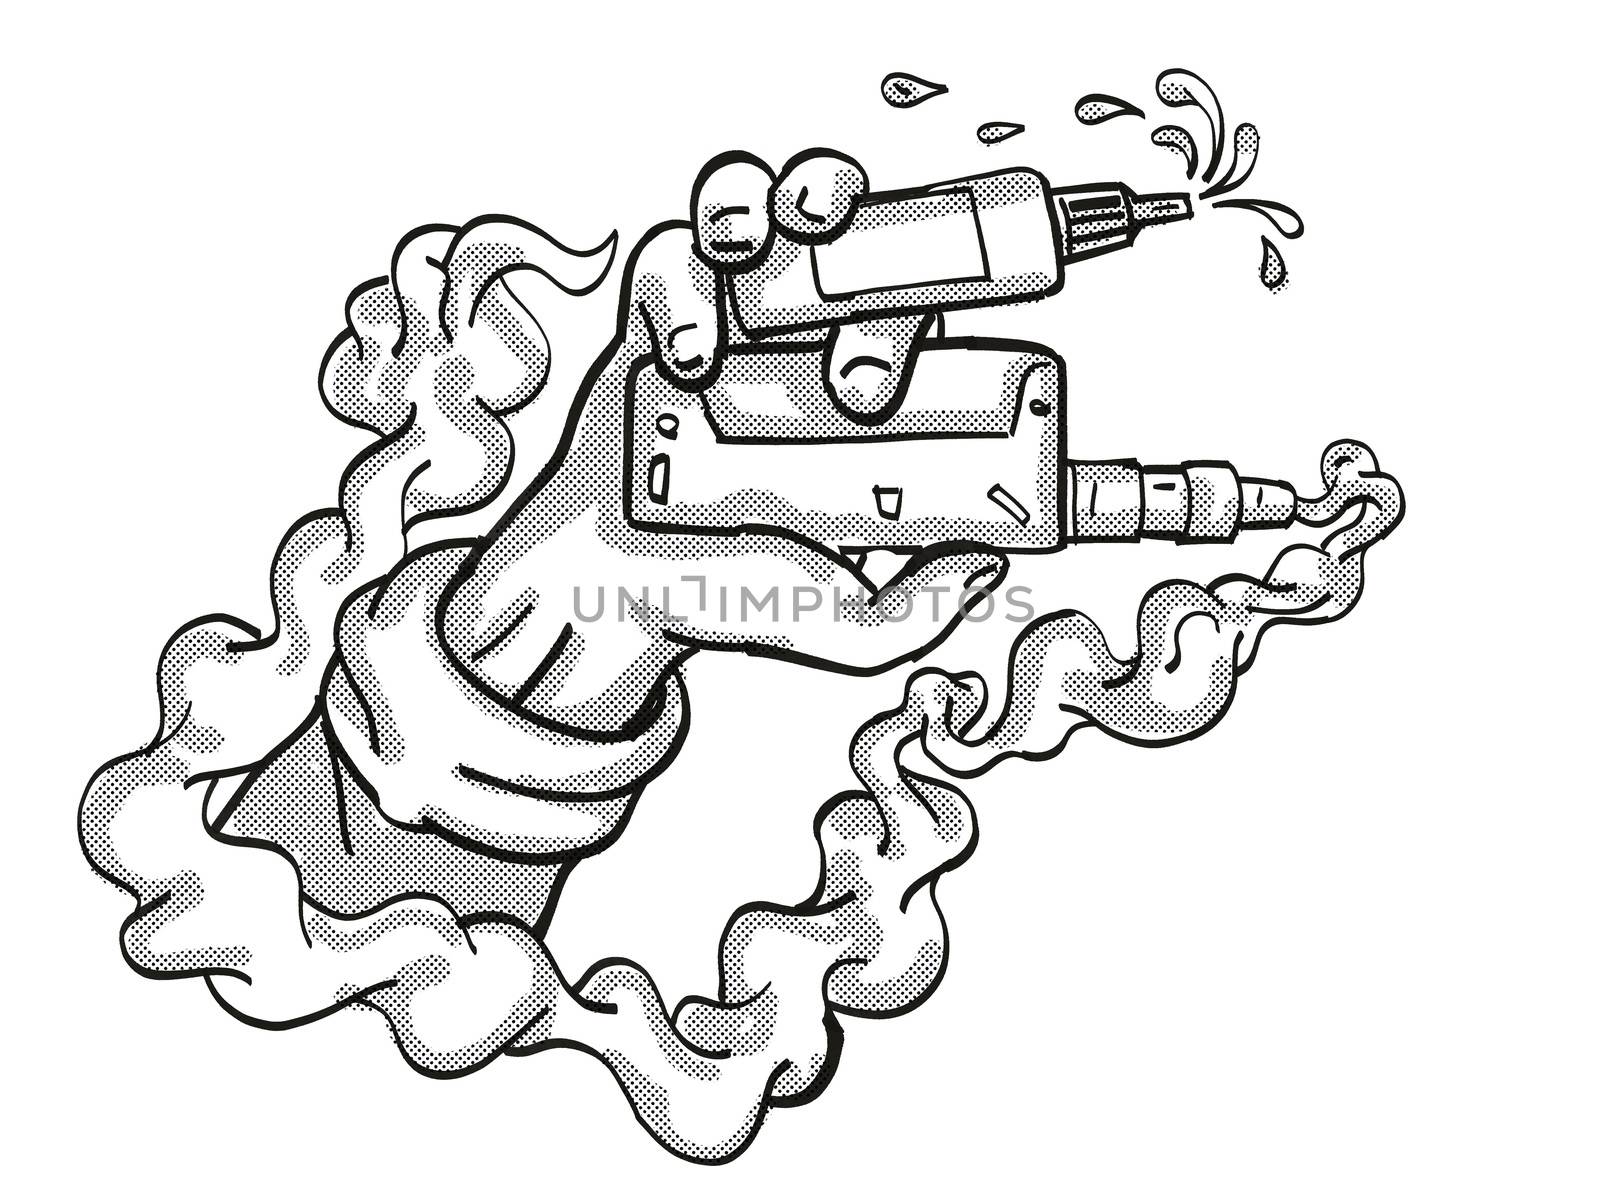 Tattoo cartoon style drawing illustration of a hand holding vape electronic cigarette kit on isolated background done in black and white.